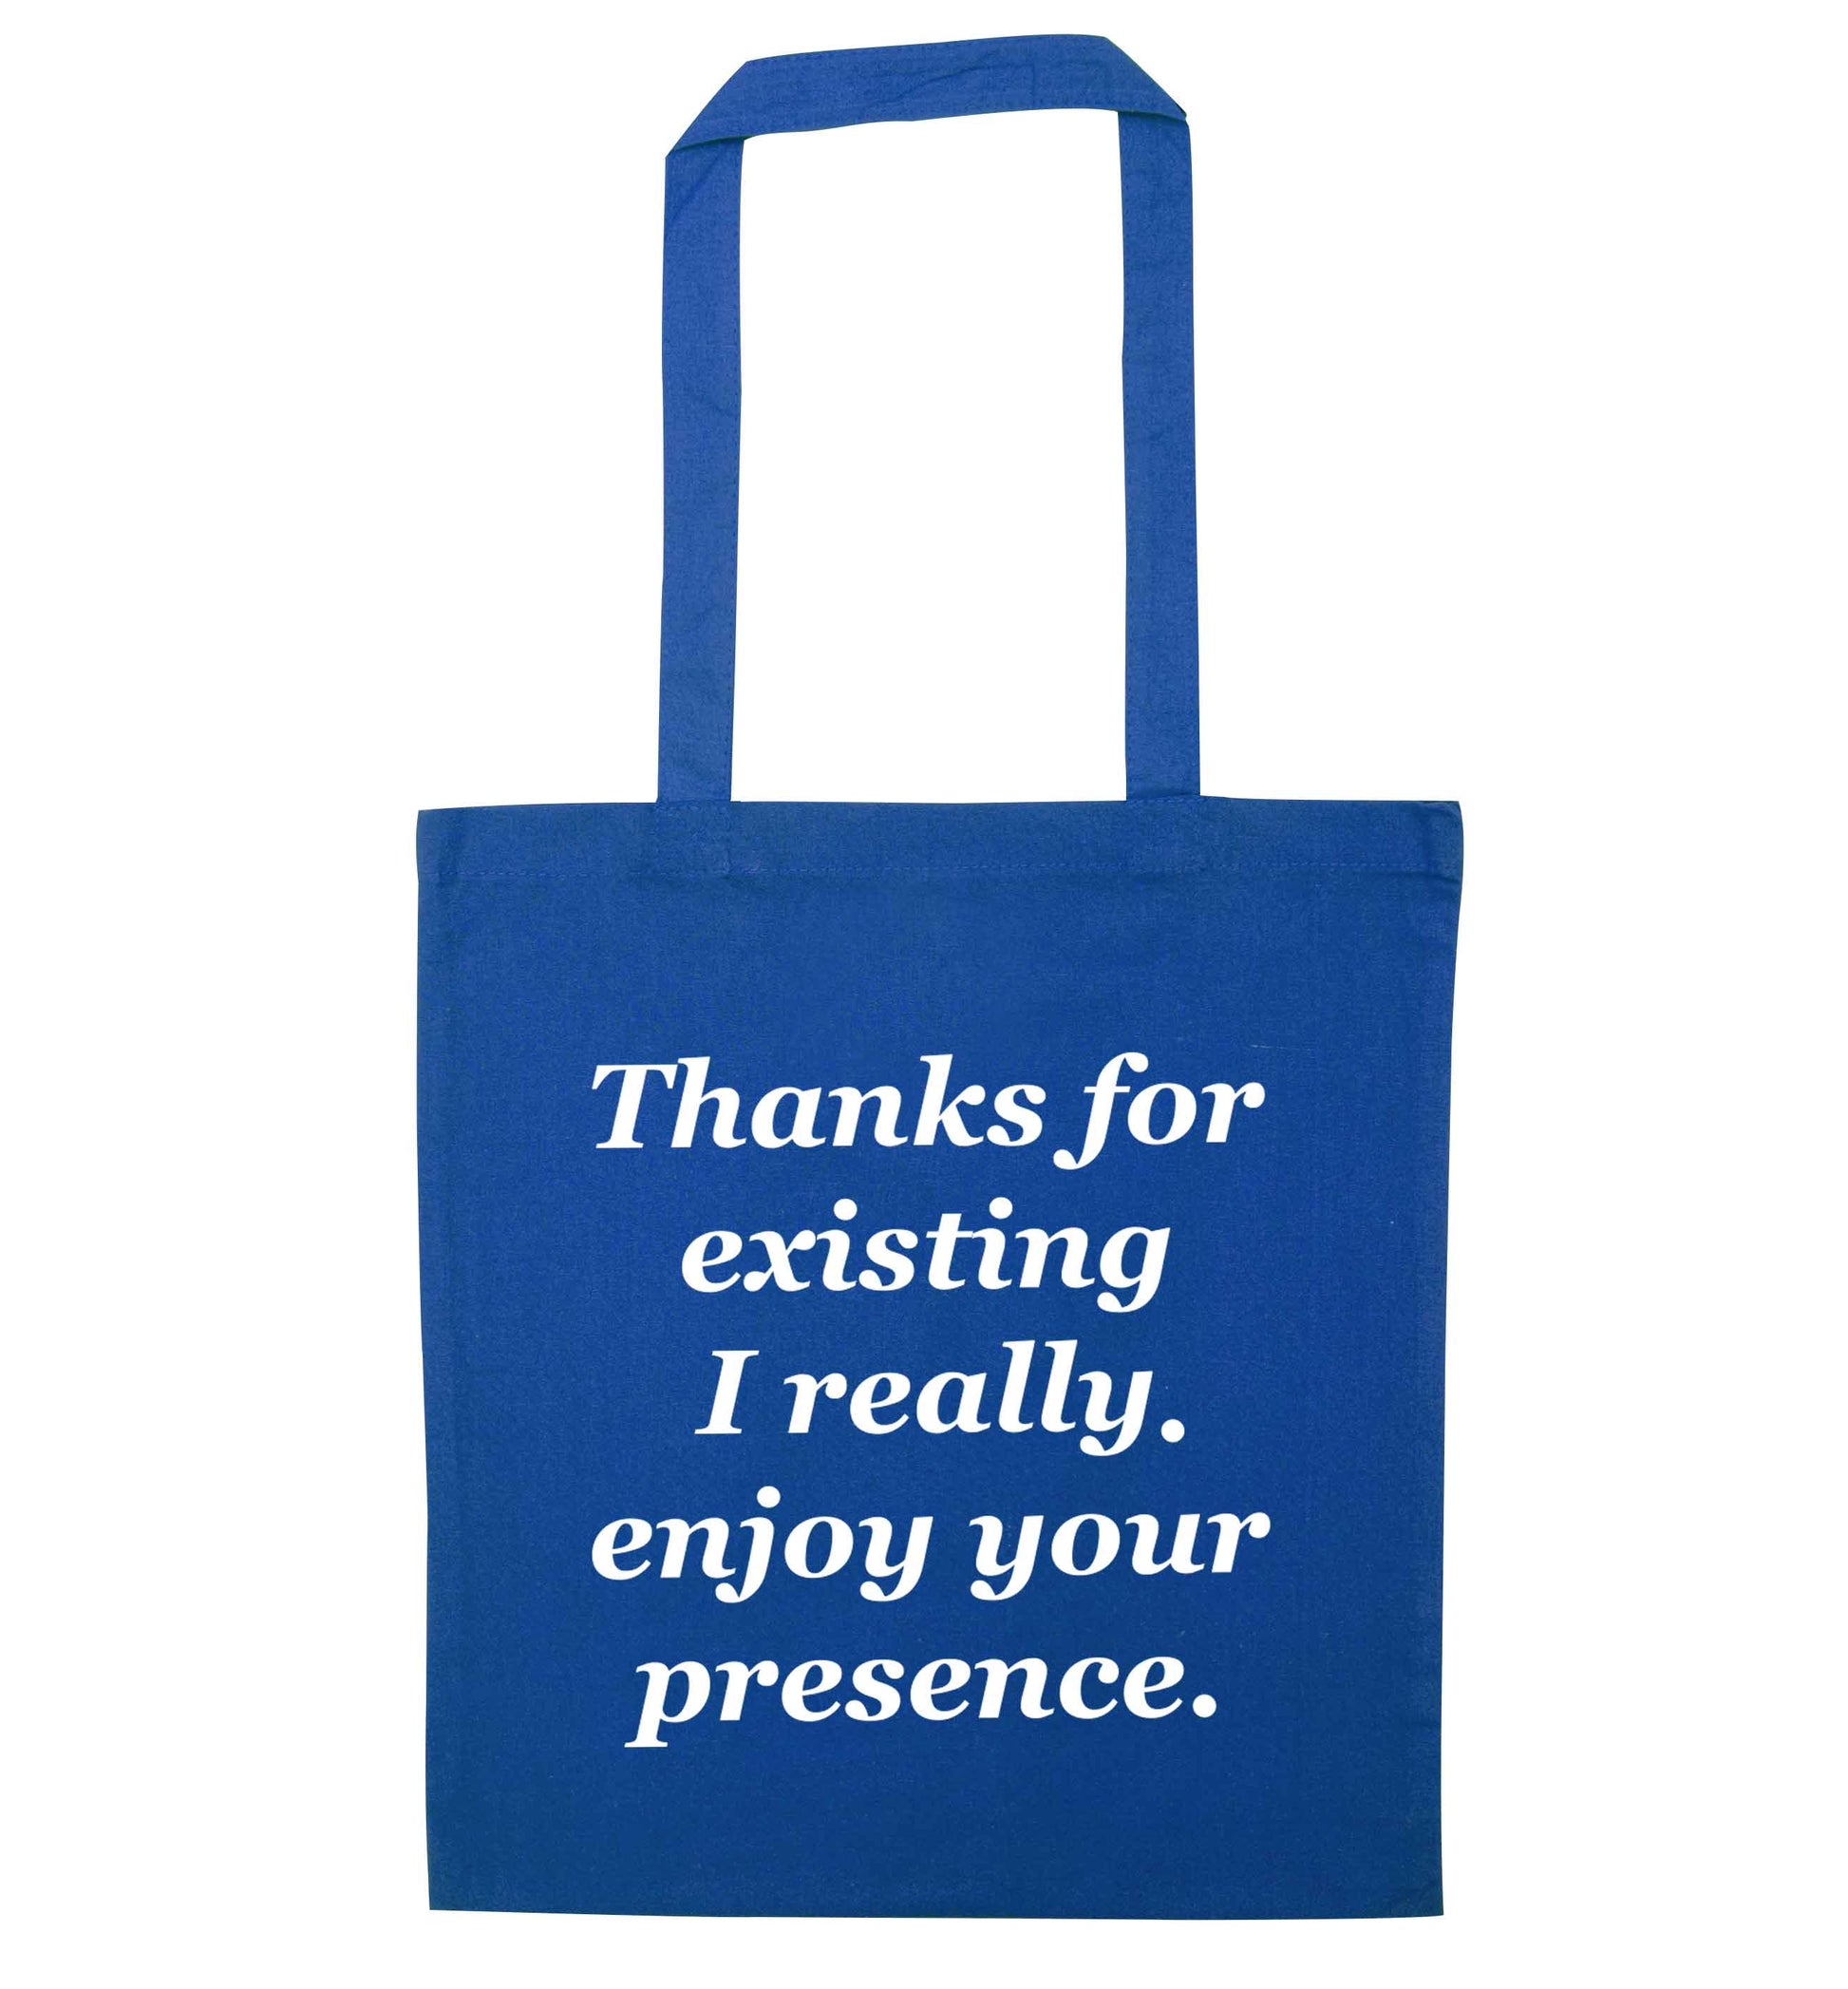 Thanks for existing I really enjoy your presence blue tote bag